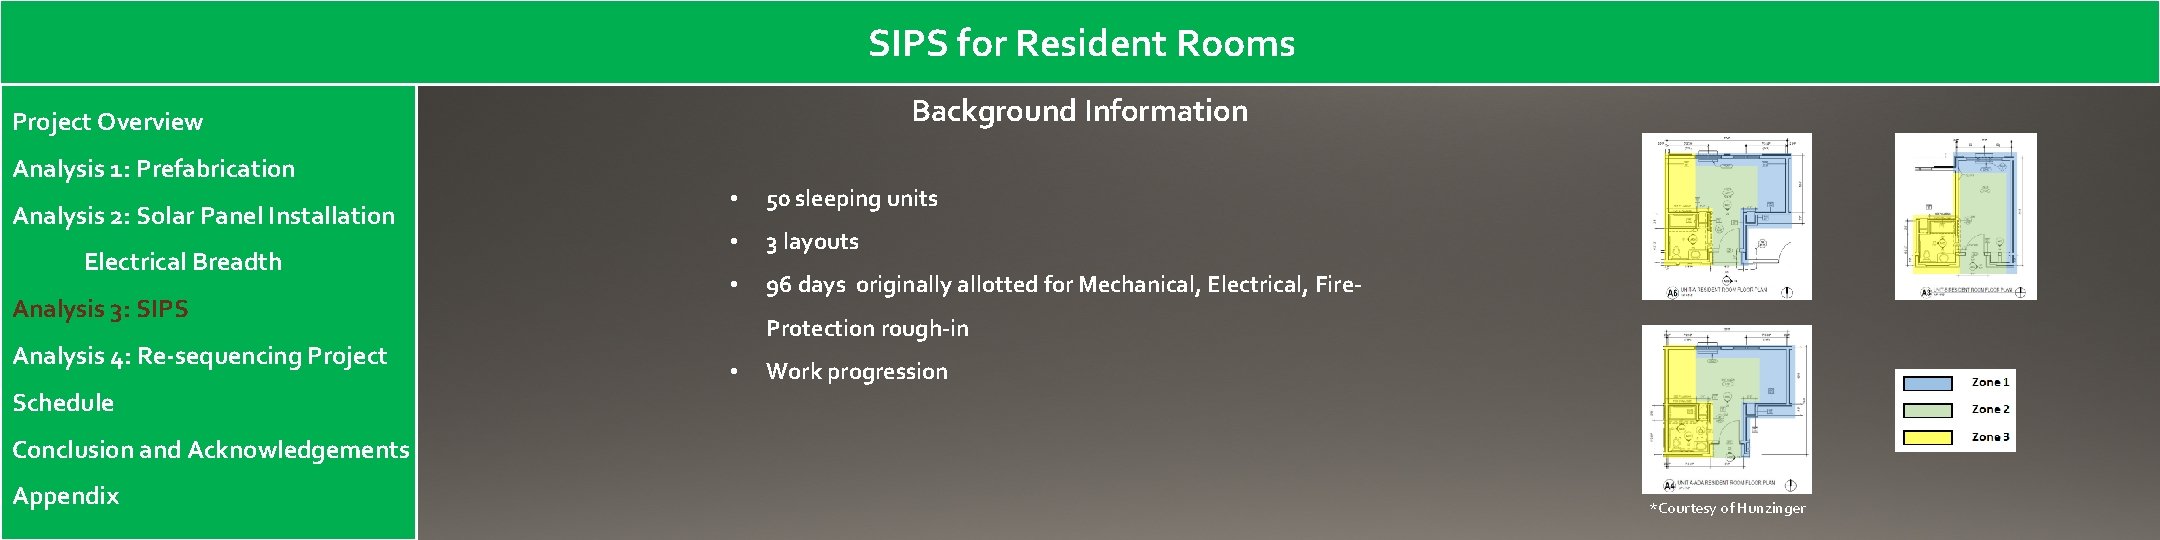 SIPS for Resident Rooms Background Information Project Overview Analysis 1: Prefabrication Analysis 2: Solar